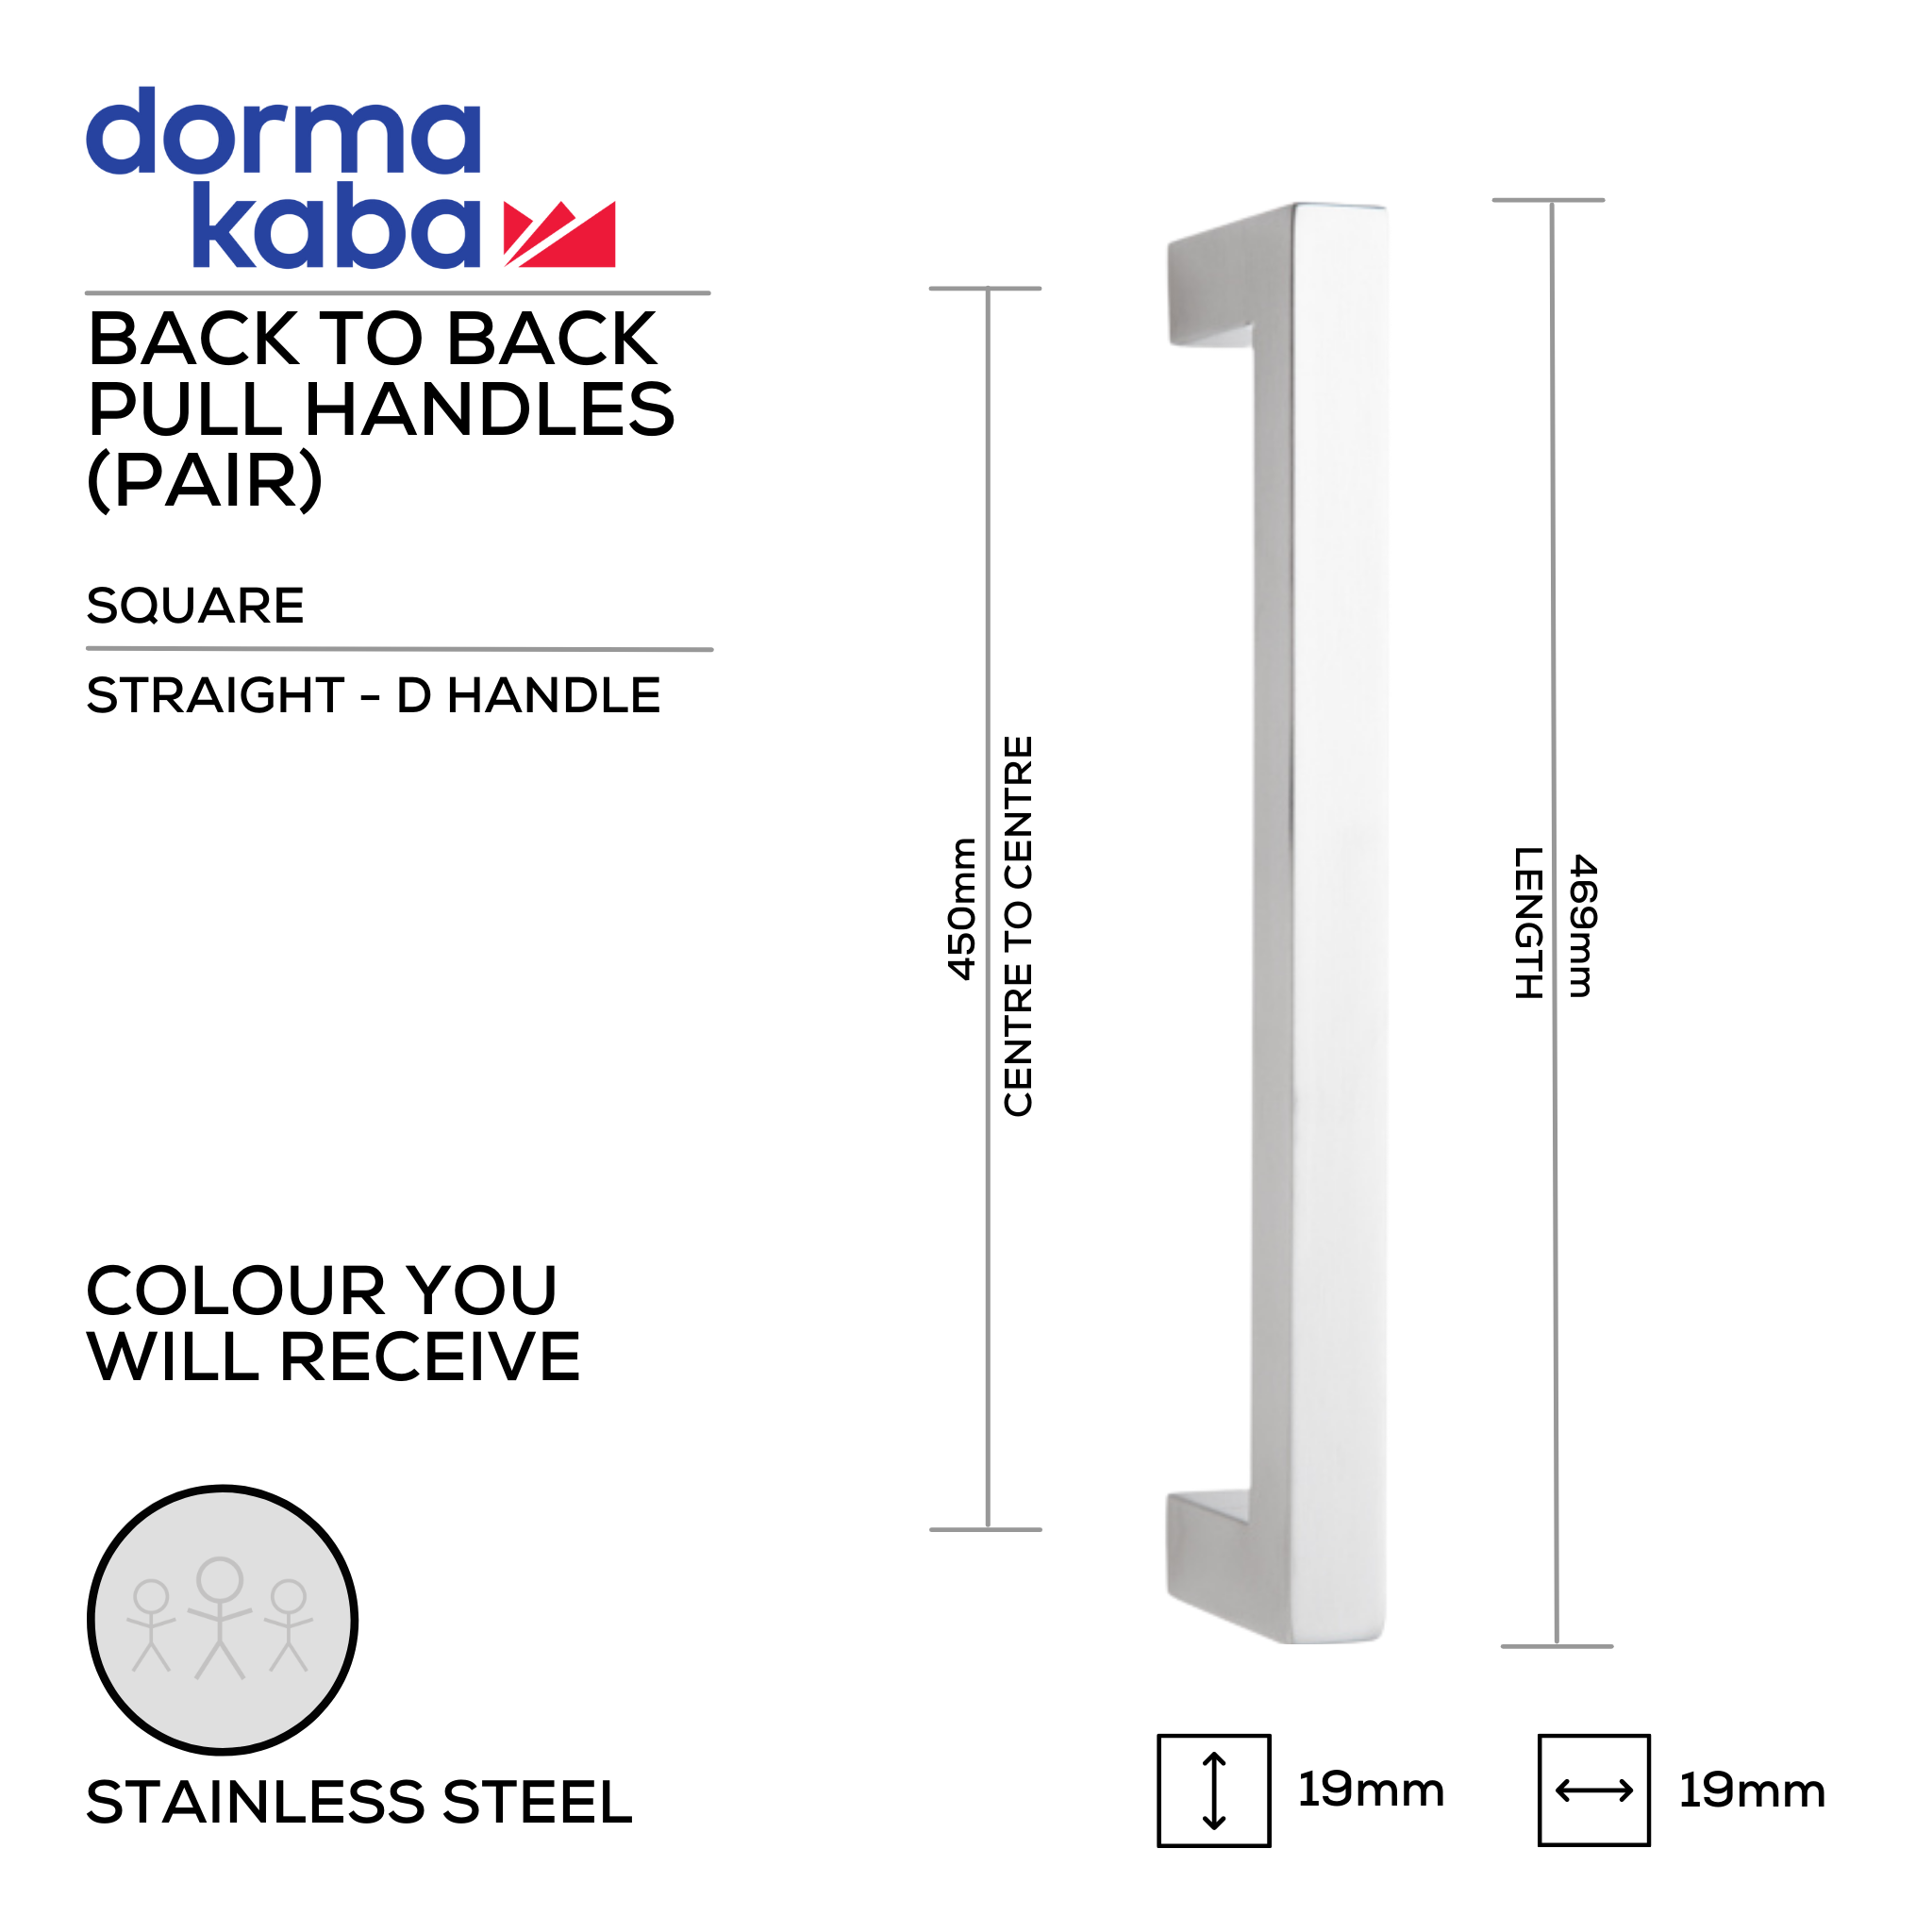 DSQ 06H 450 BTB, Pull Handle, Square, Straight, D Handle, BTB, 19mm (d) x 469mm (l) x 450mm (ctc), Stainless Steel, DORMAKABA